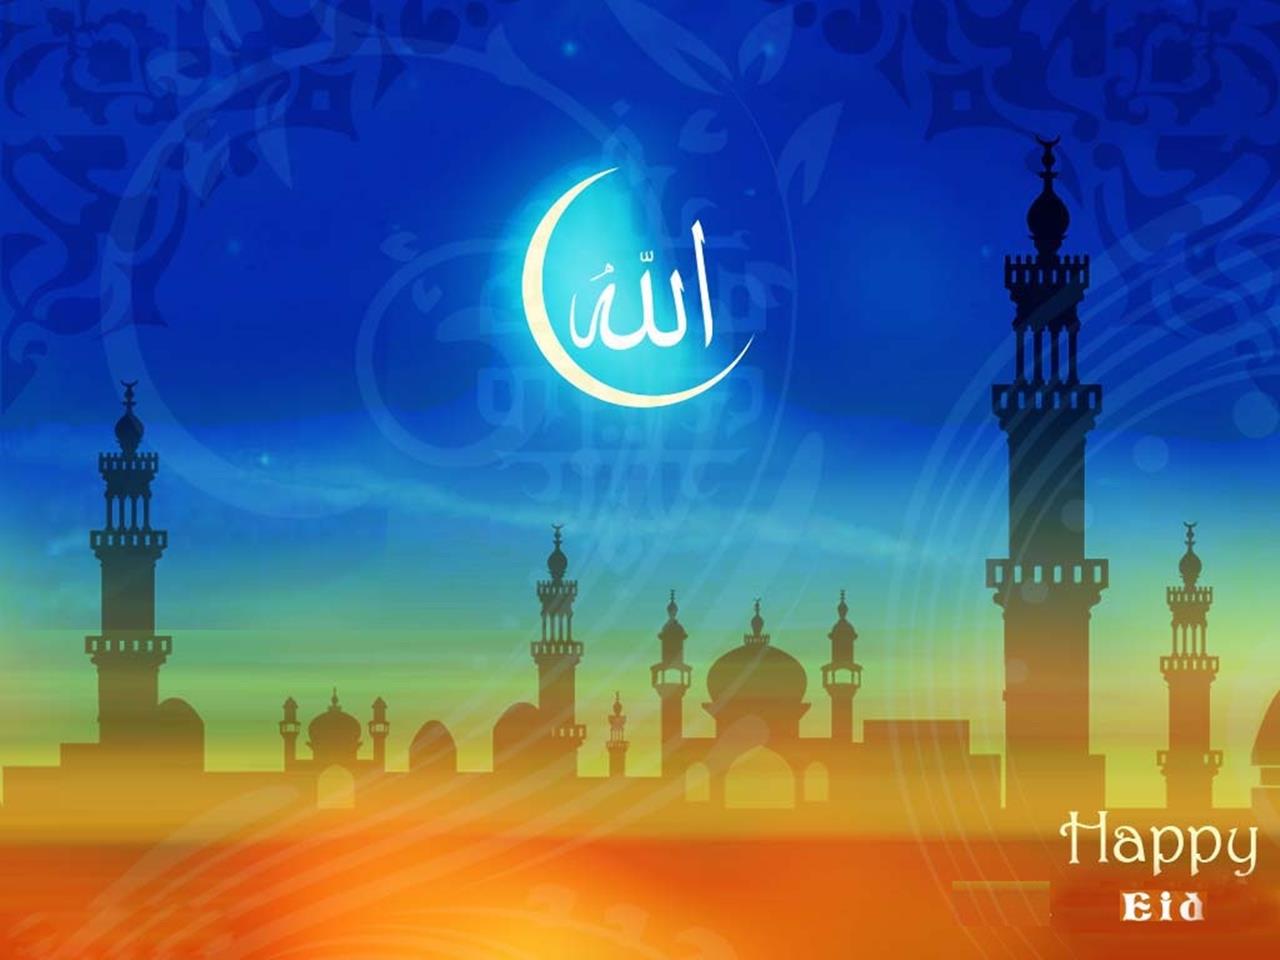 Happy EID Ul Adha Wallpapers - New Greeting Cards 2014 ...